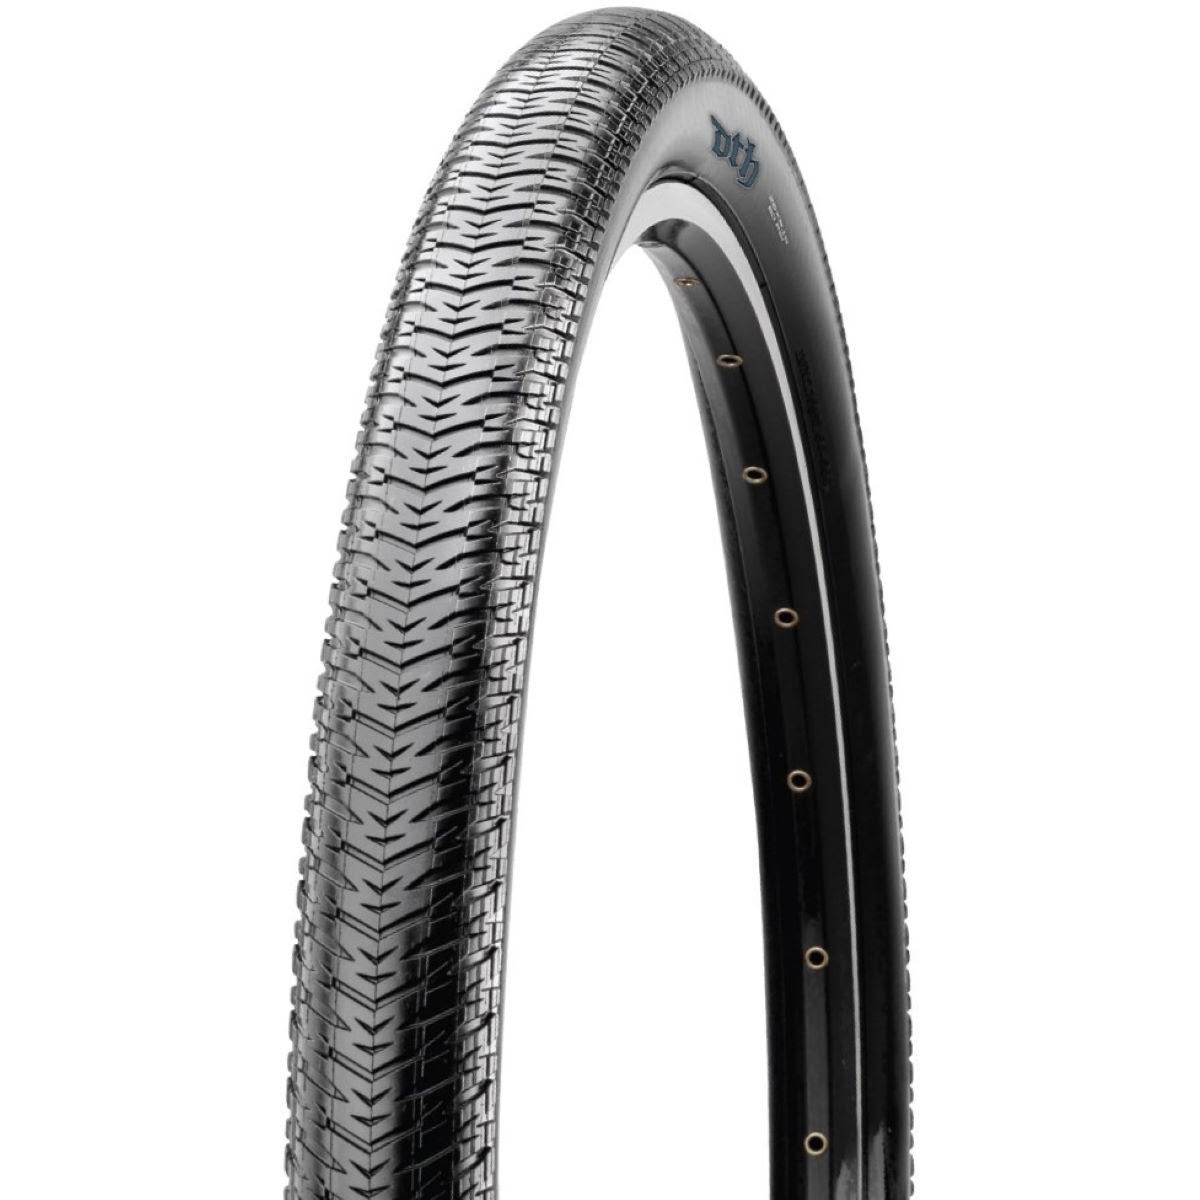 Maxxis DTH Wire Bead BMX Bicycle Tire - 24" x 1.75", Black